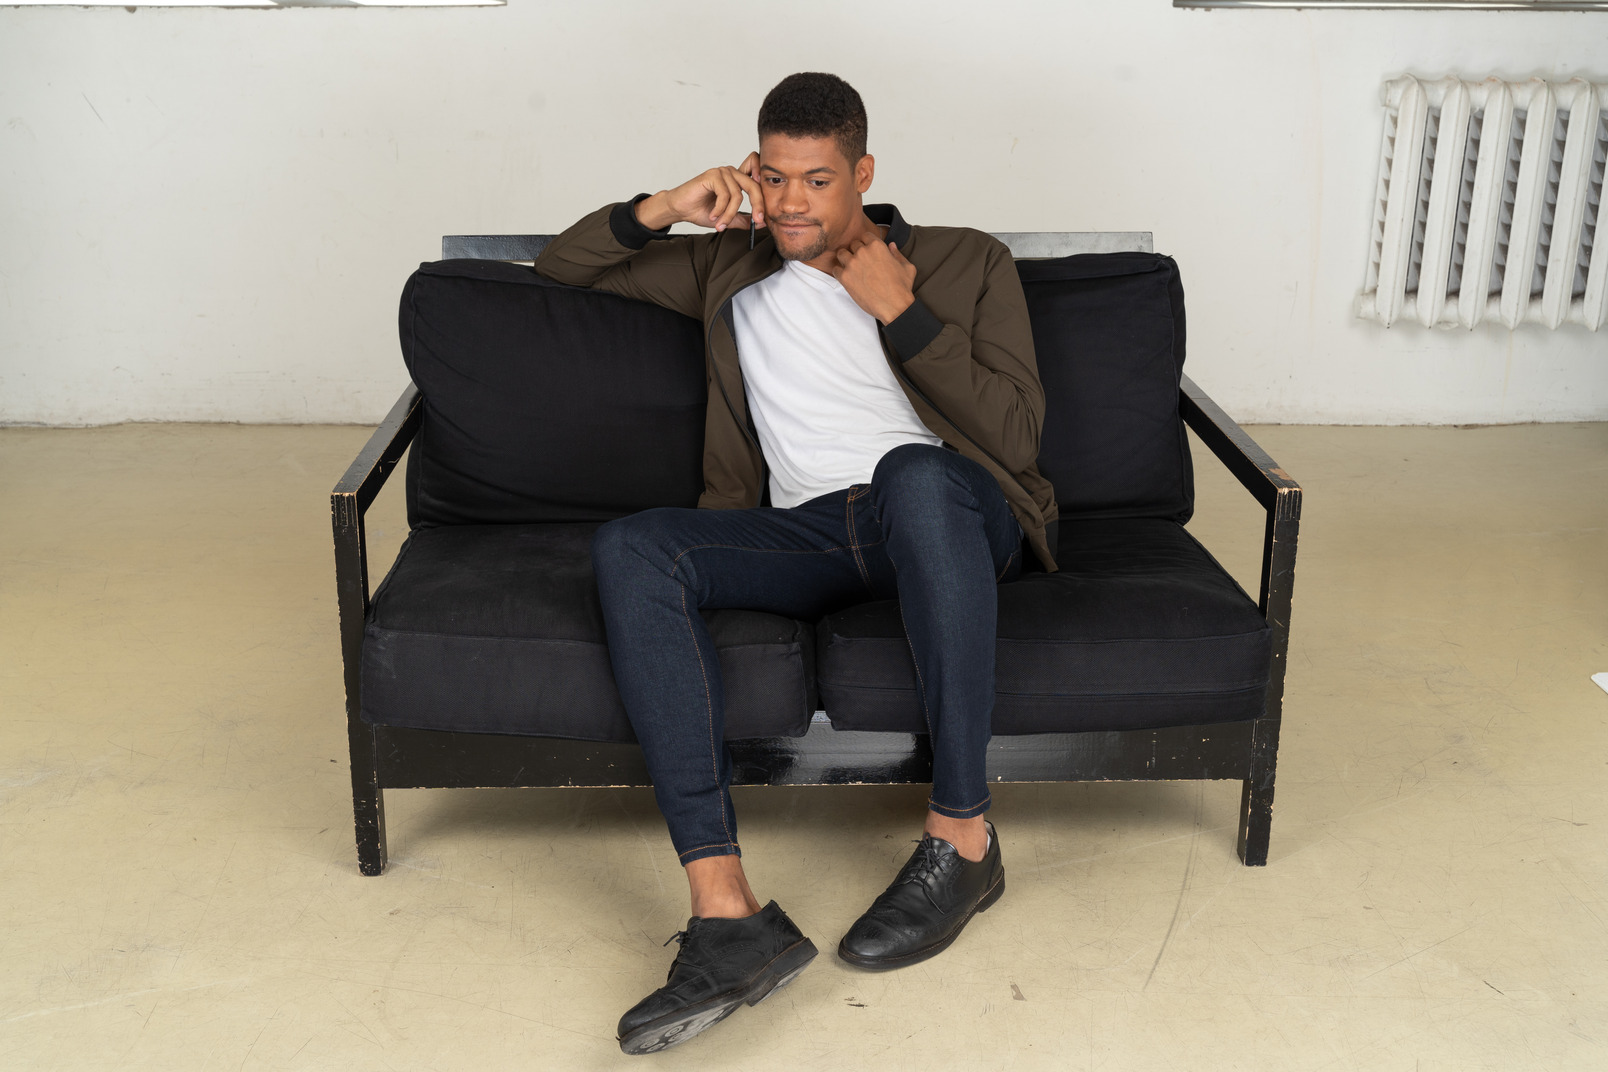 Front view of a perplexed young man sitting on a sofa